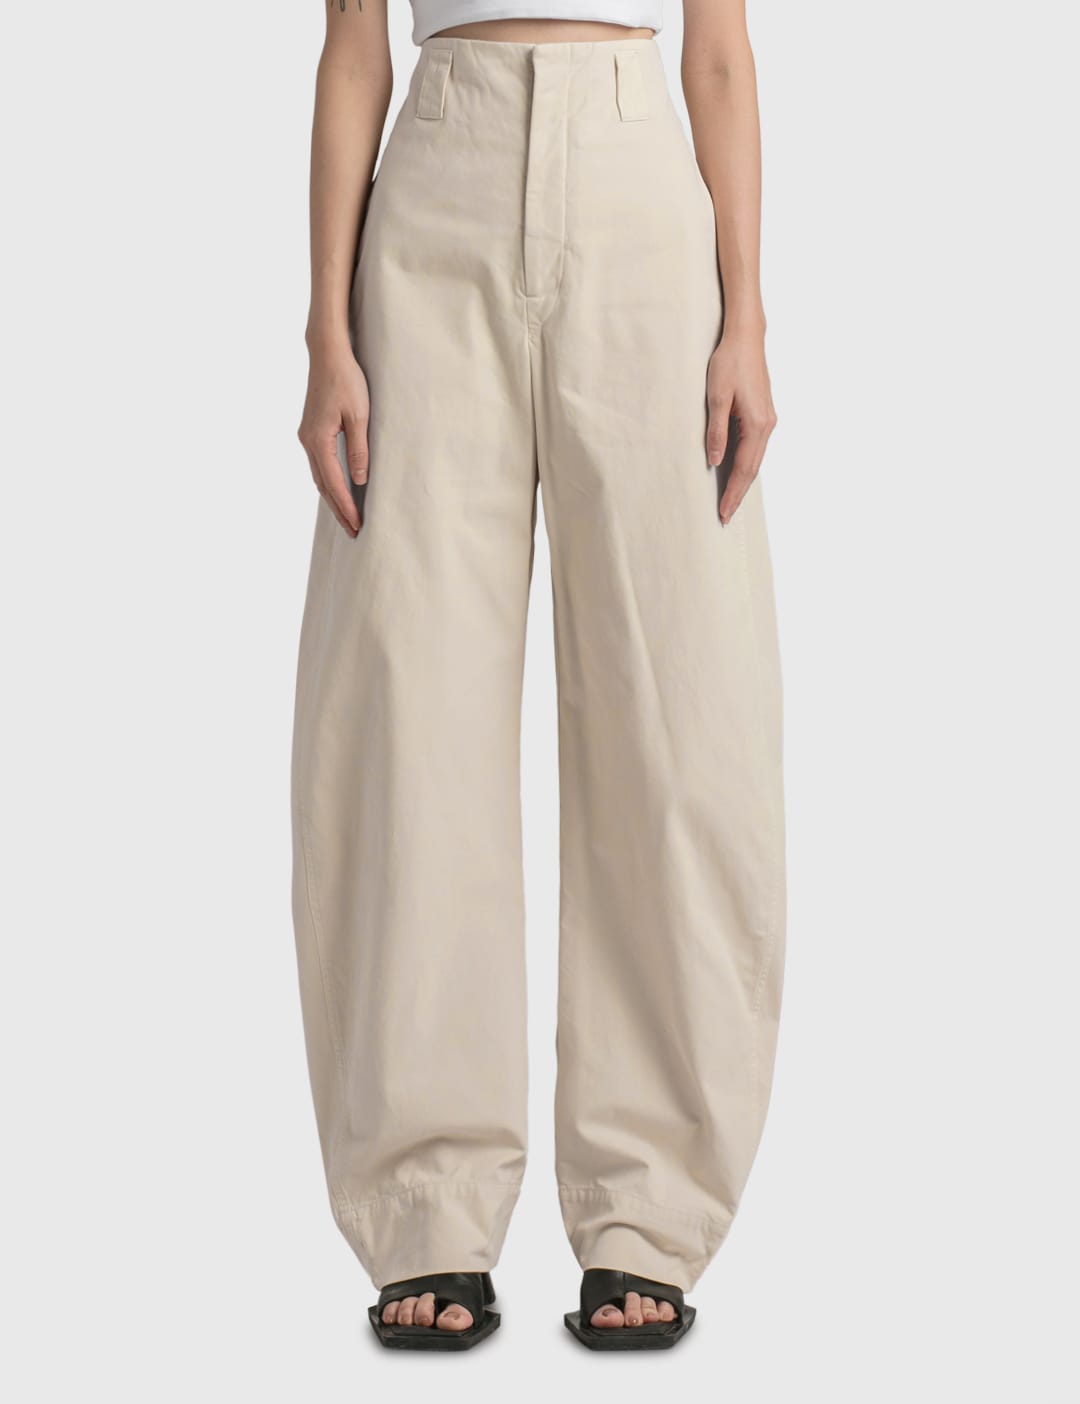 X-Girl - Wide Tapered Overall | HBX - Globally Curated Fashion and 